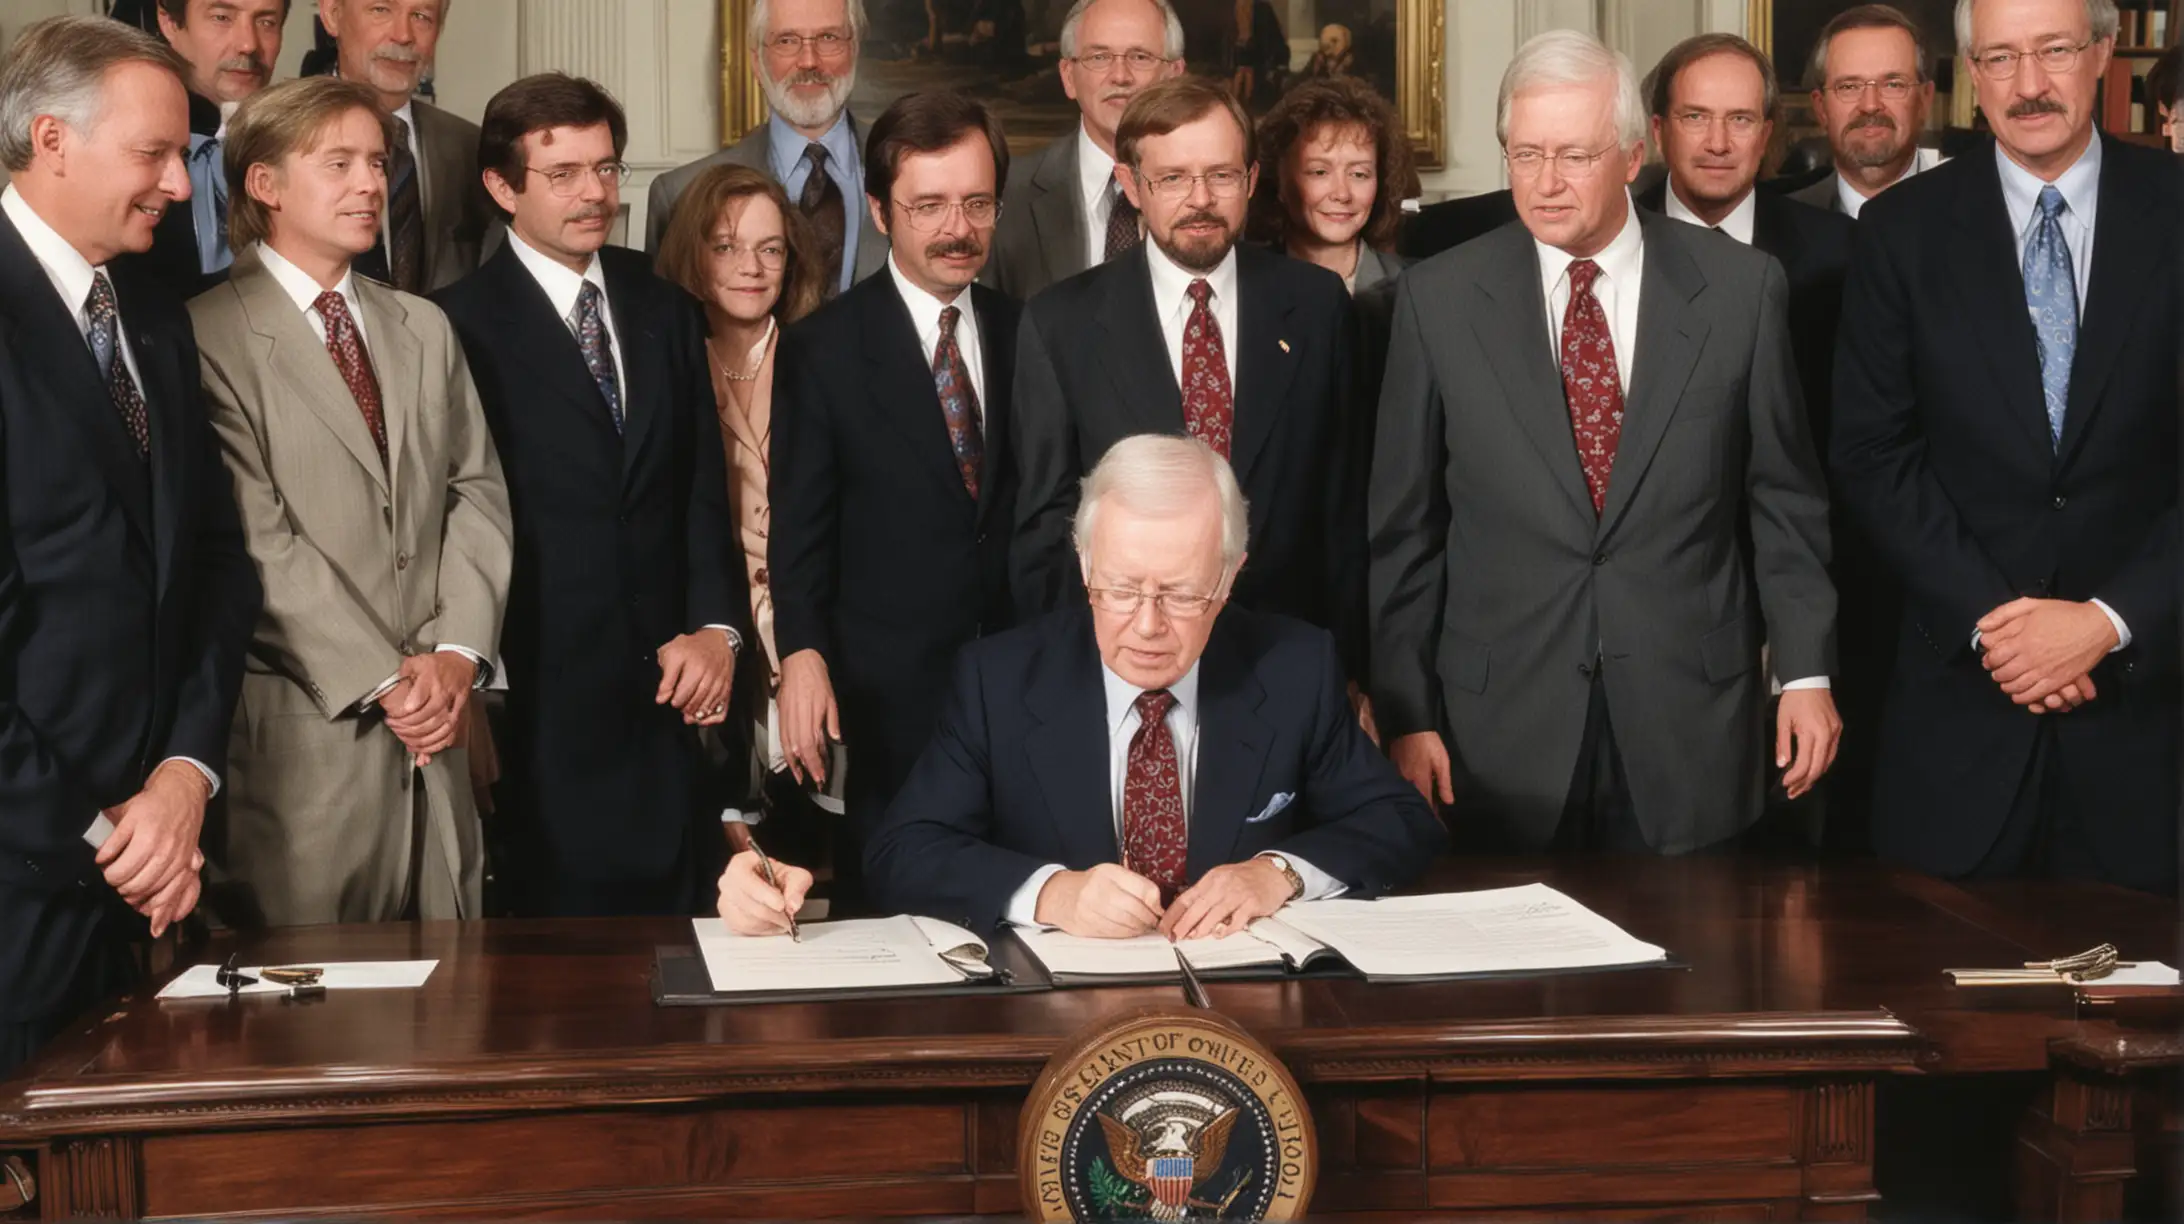 Image prompt: Departamento de Energía
Description: An image of Jimmy Carter signing legislation to establish the Department of Energy, surrounded by energy experts and scientists, with visuals of renewable energy sources like wind turbines and solar panels, highlighting Carter's commitment to energy conservation and alternative energy development.